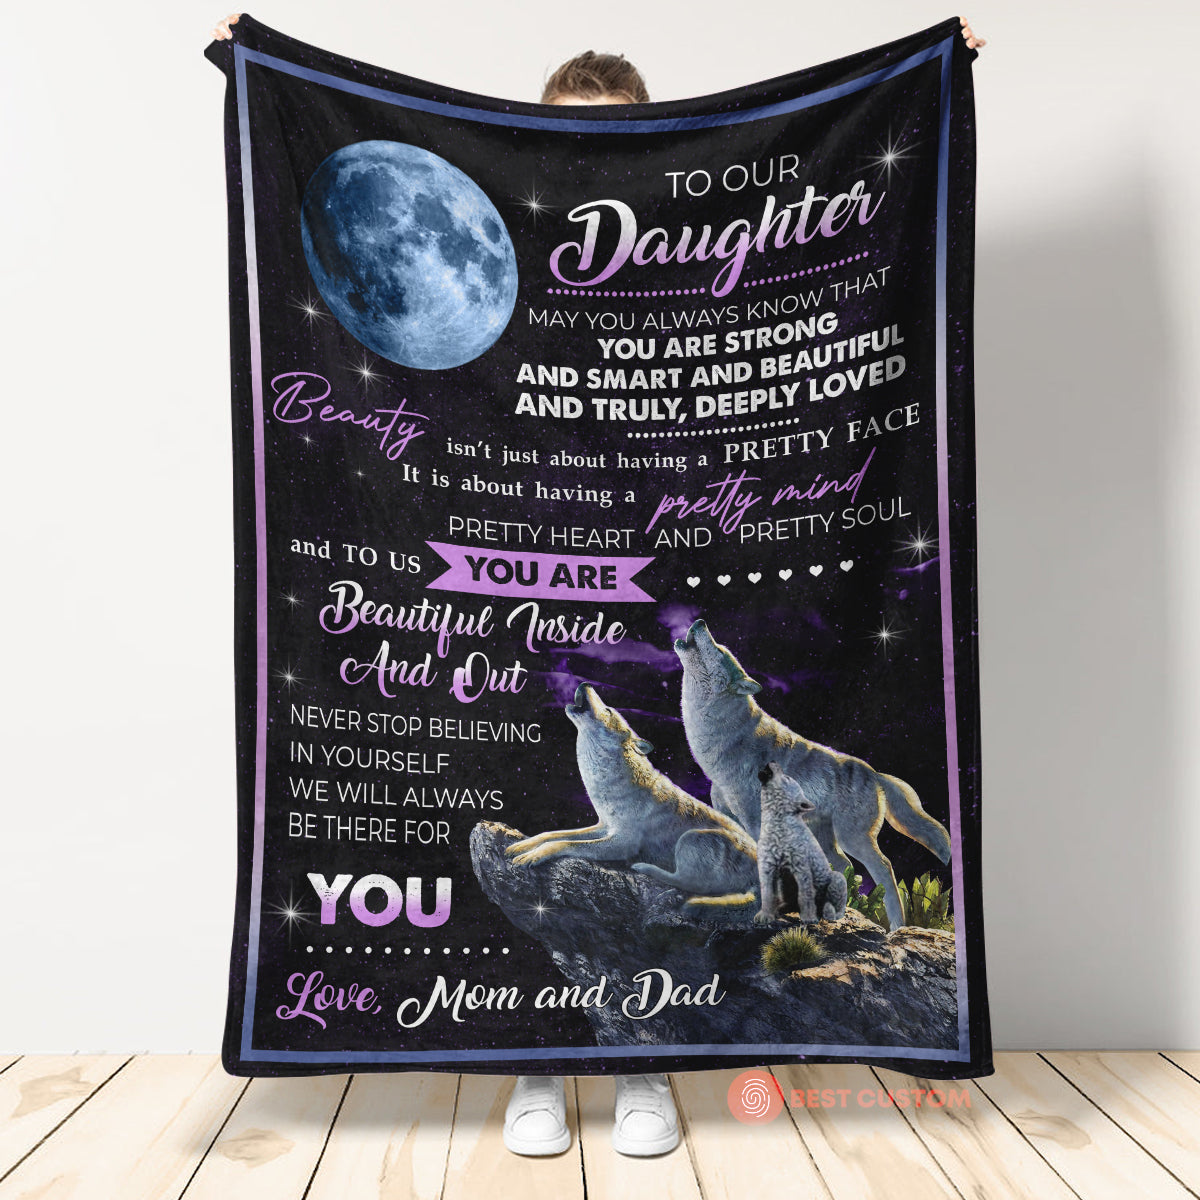 To Our Daughter - We will Always be There for You Wolf Blanket Gift For Daughter From Mom And Dad Birthday Gift Home Decor Bedding Couch Sofa Soft And Comfy Cozy